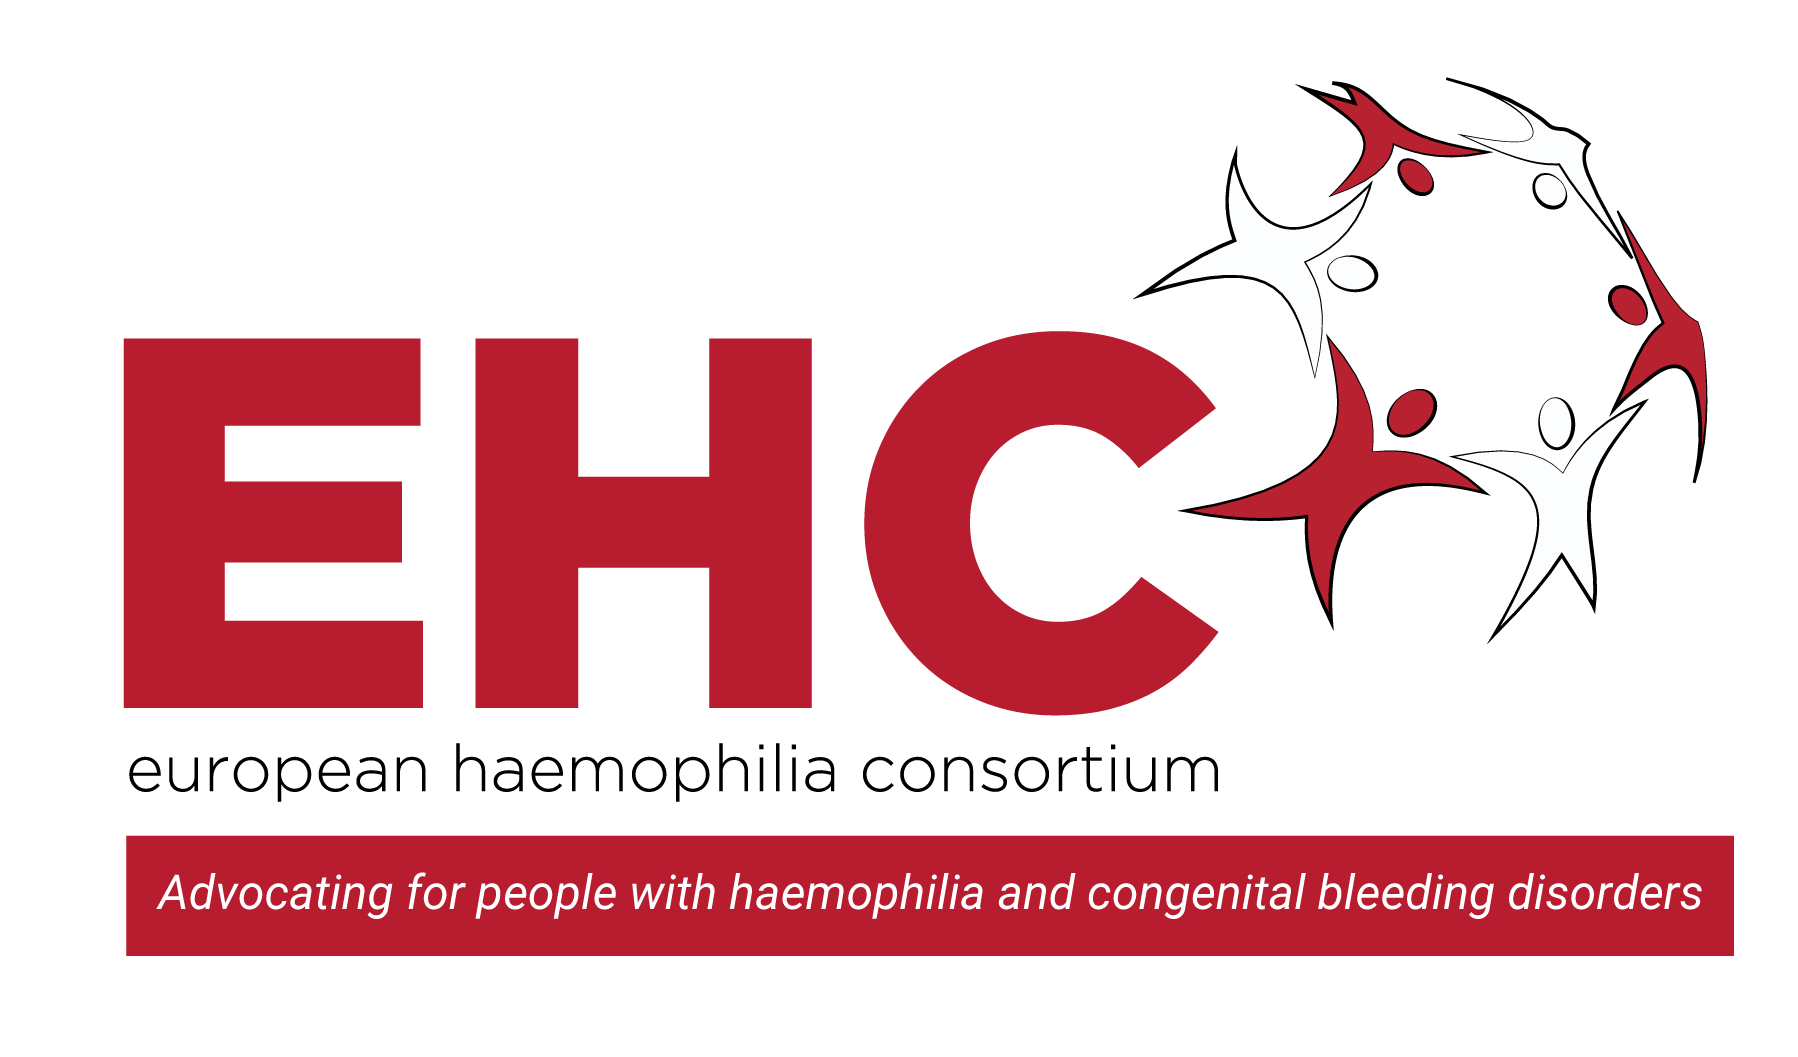 EHC – European Haemophilia Consortium - Advocating for people with haemophilia and congenital bleeding disorders - /ehc-now-novel-technologies-in-haemophilia-care-ehc-tried-and-tested-methods-to-keep-up-to-date-with-an-evolving-medical-landscape/